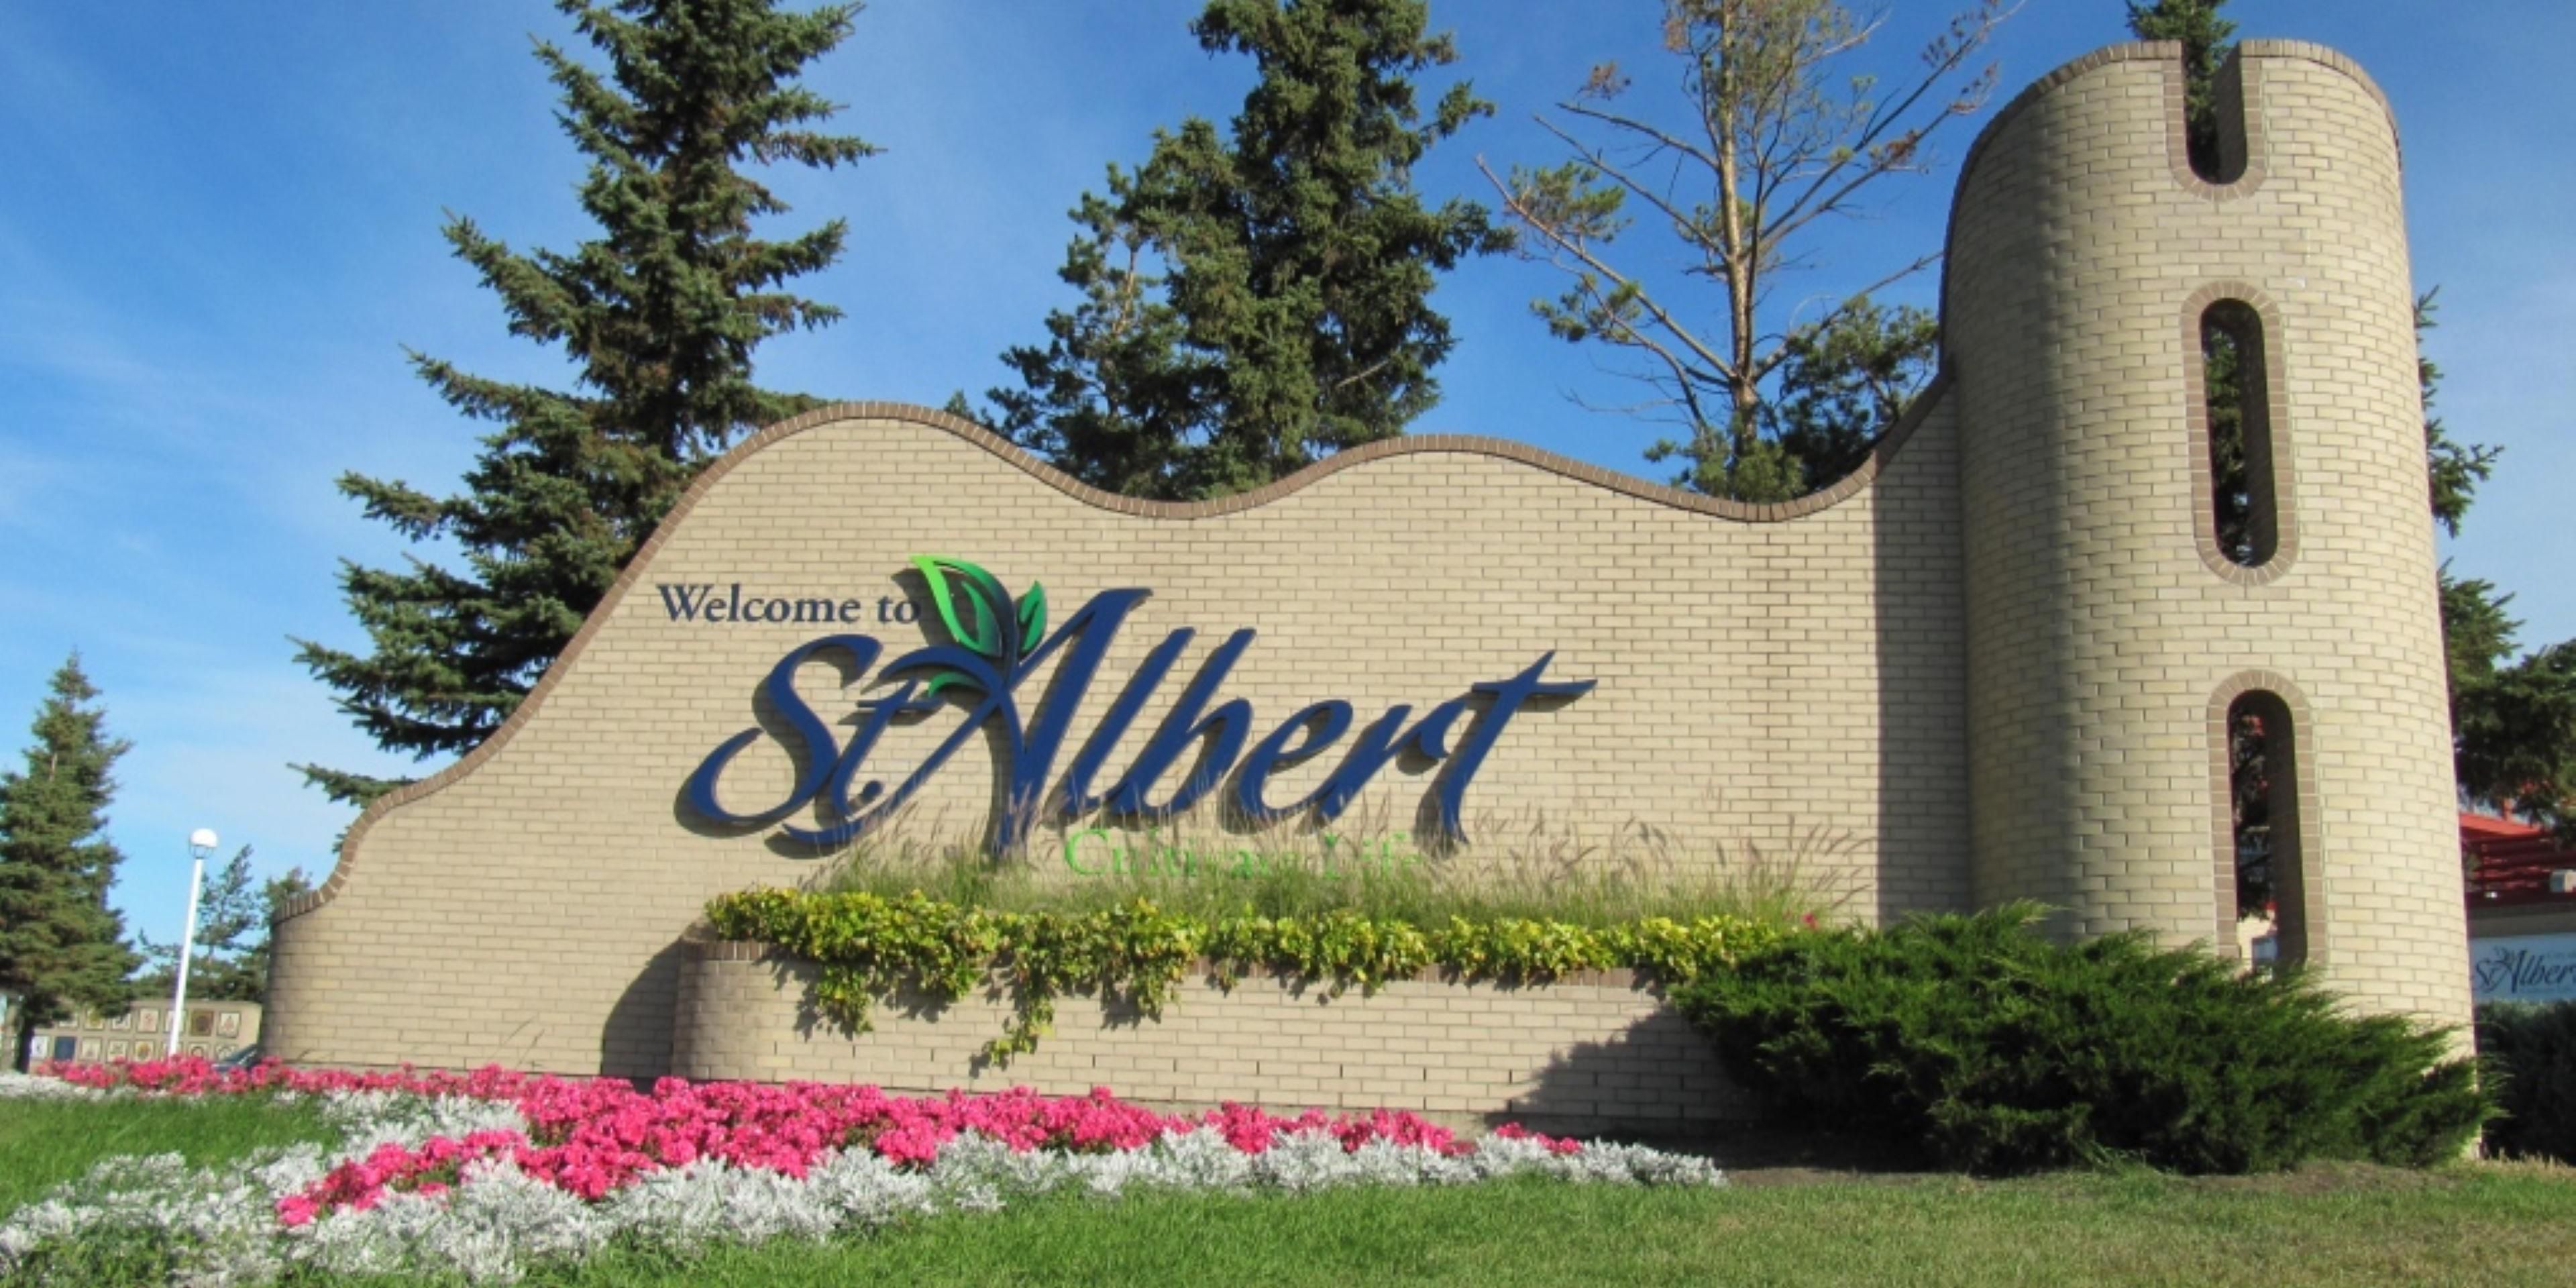 We have created a list of our favorite attractions to visit in St. Albert. Enjoy a range of offers and flexible cancellation.